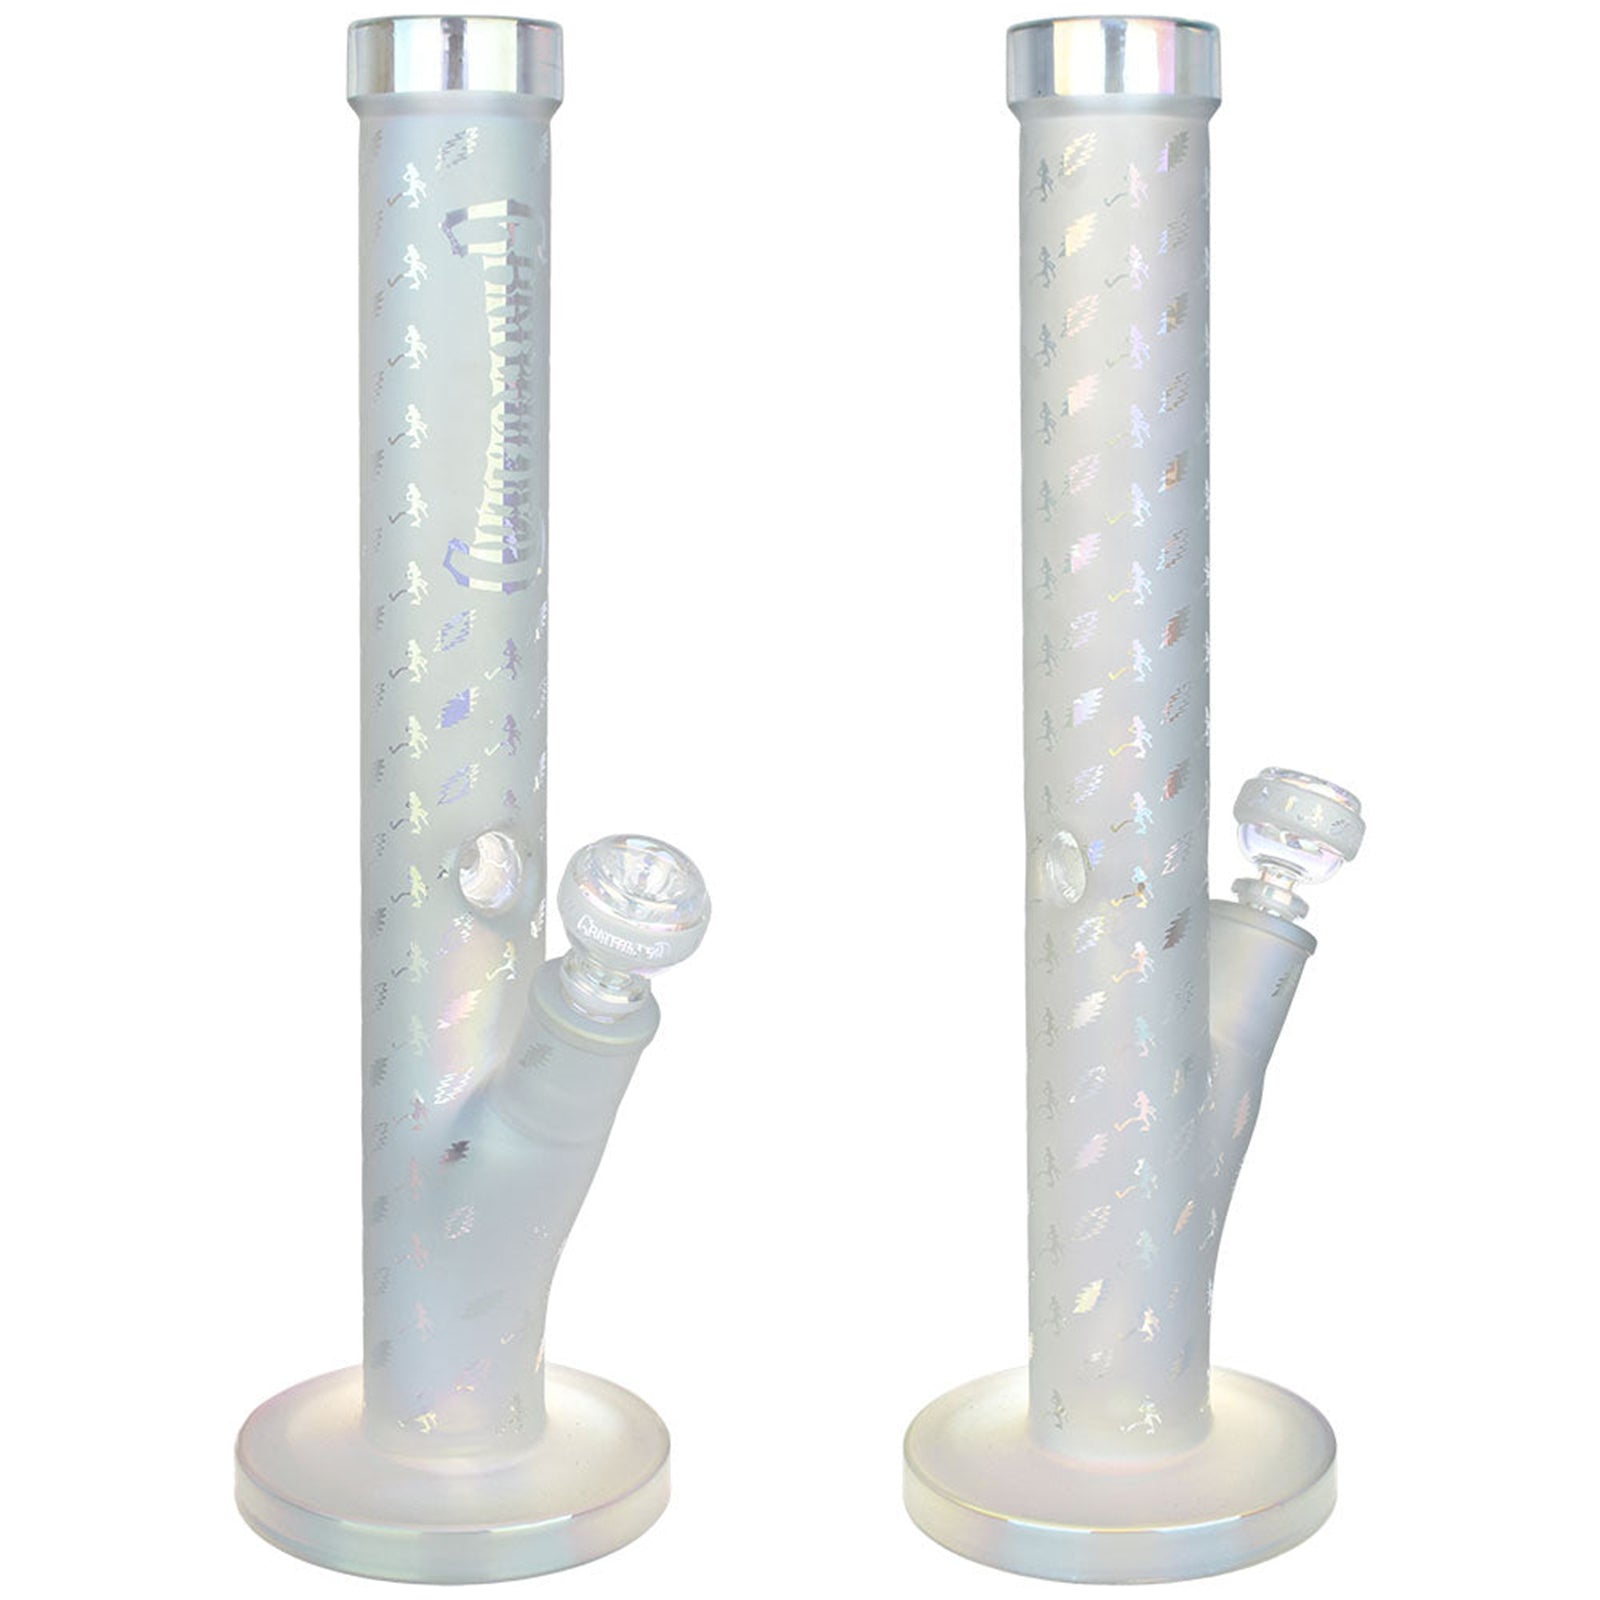 Pulsar Bolts And Skellies Straight Tube Bongs - inhalco